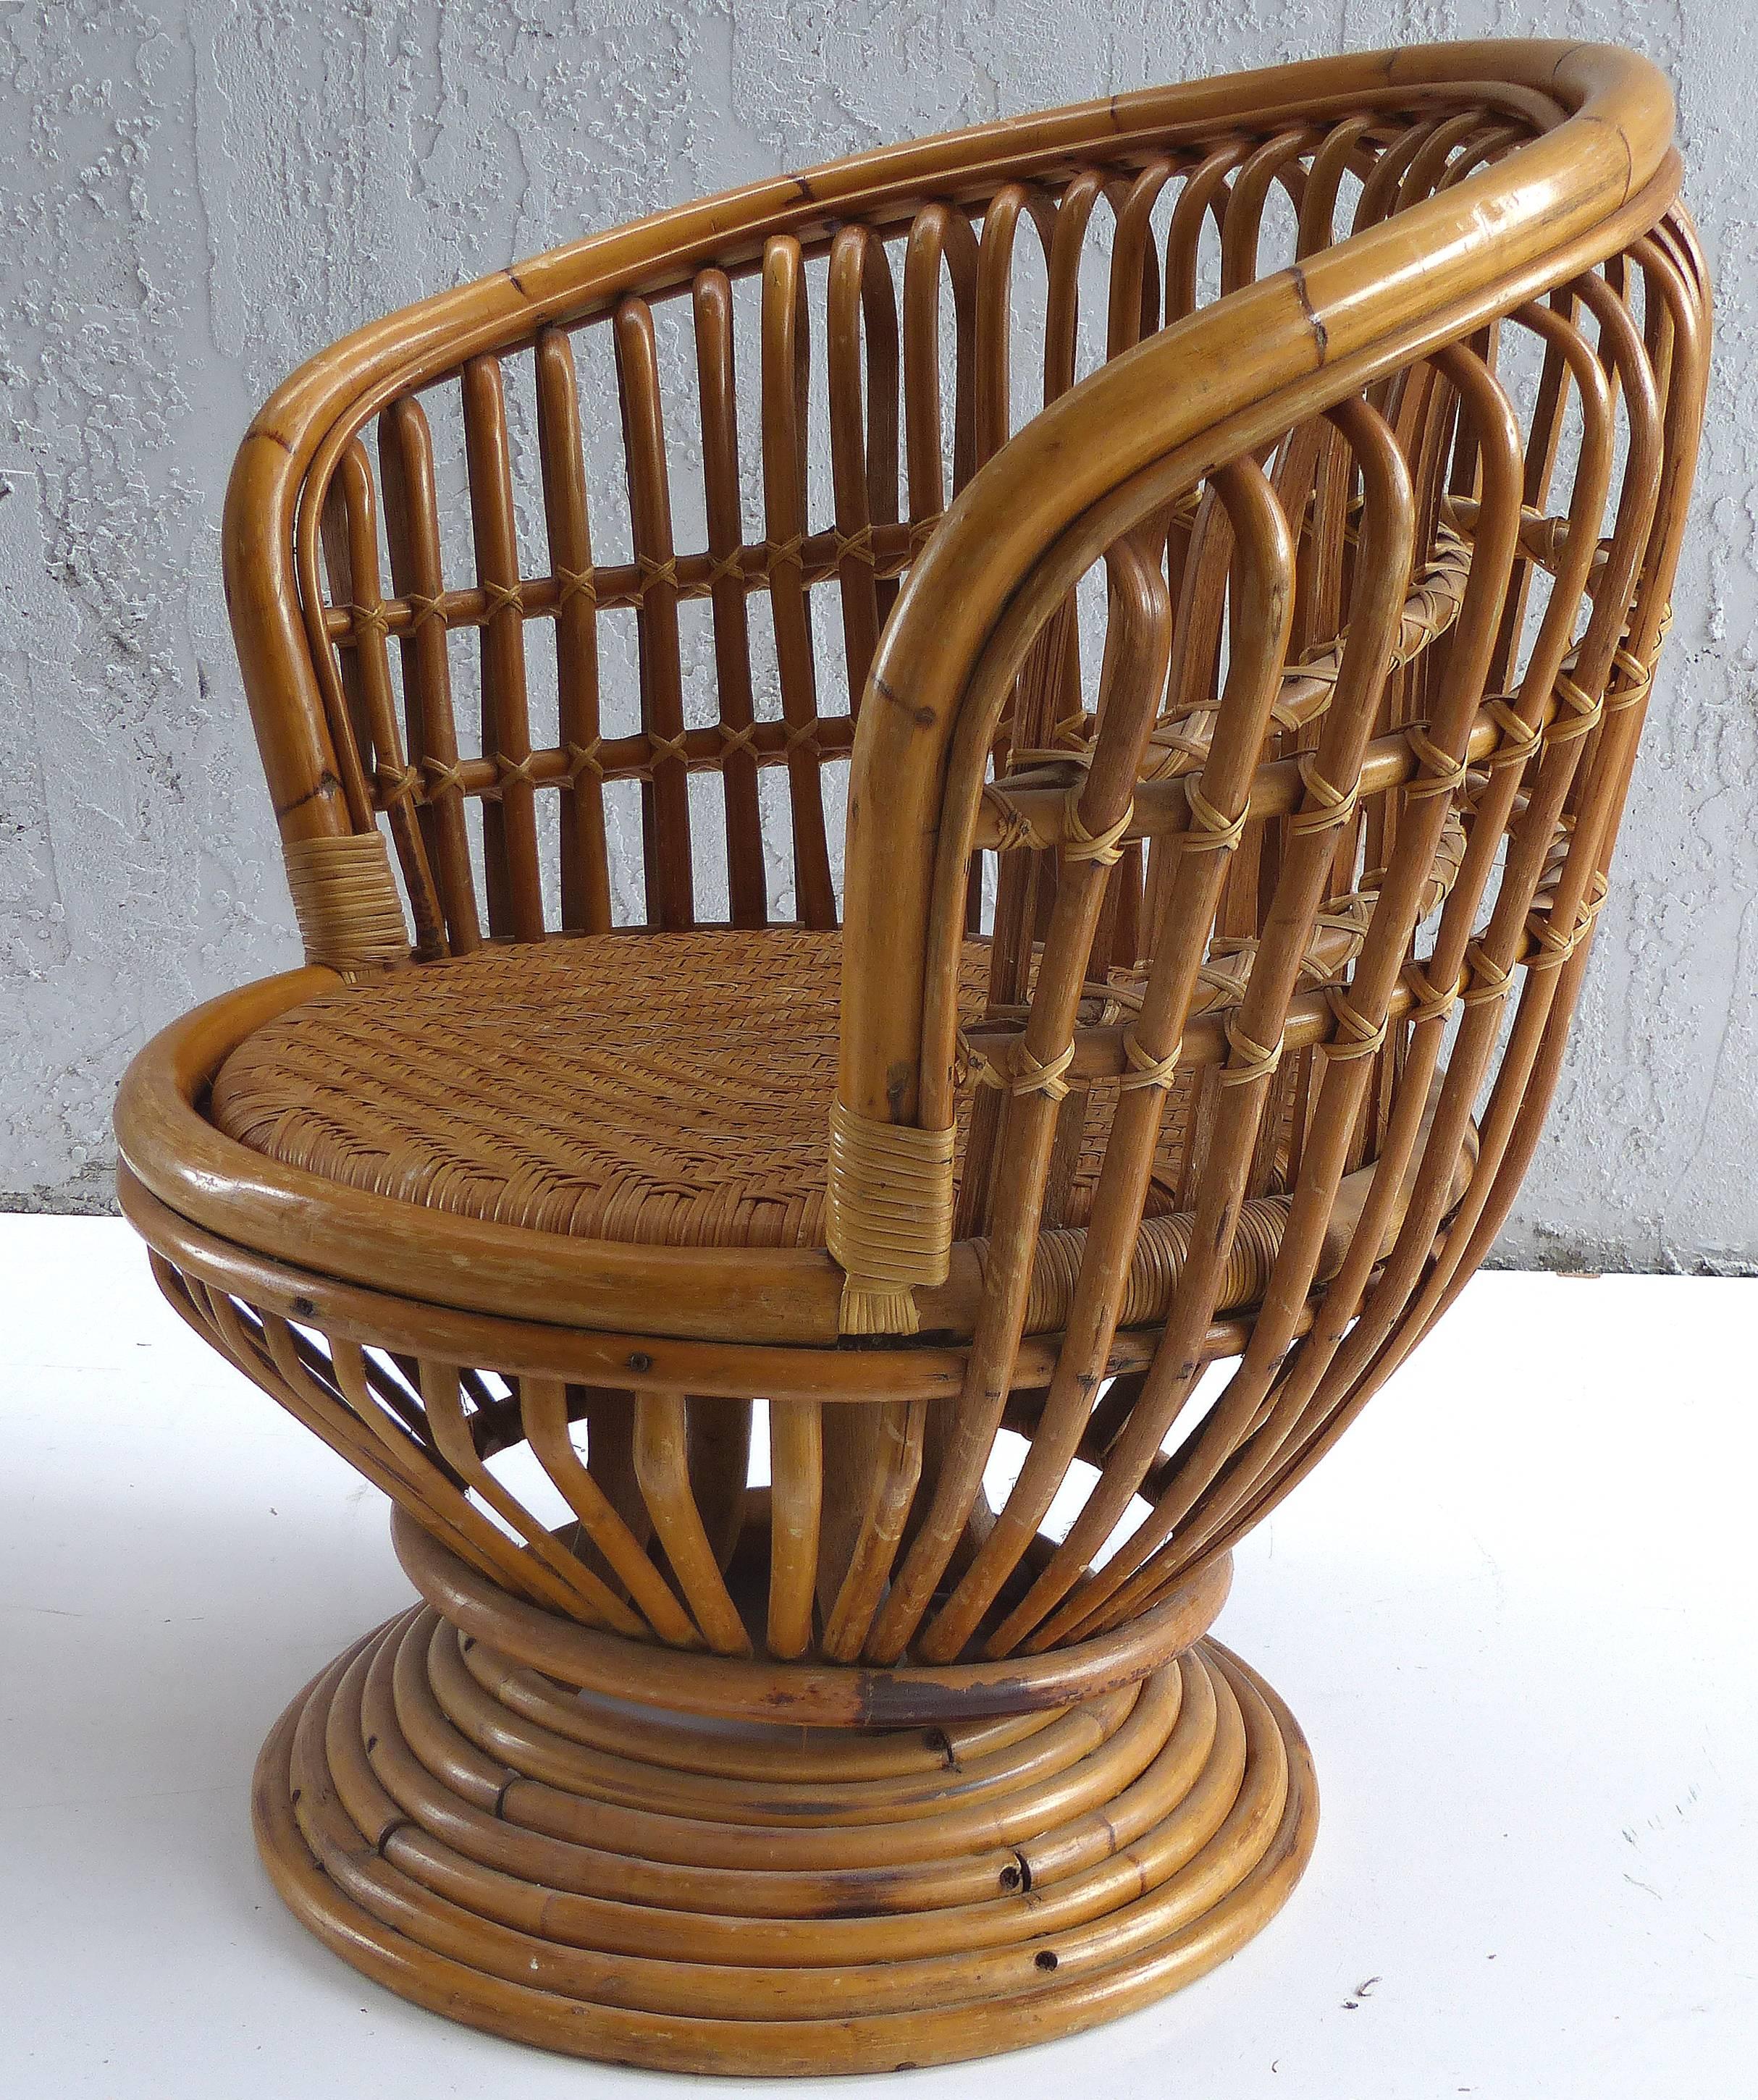 Offered for sale is a Mid-Century Modern bent rattan swivel chair by Italian designer Franco Albini. The seat is woven split rattan and measures: 15